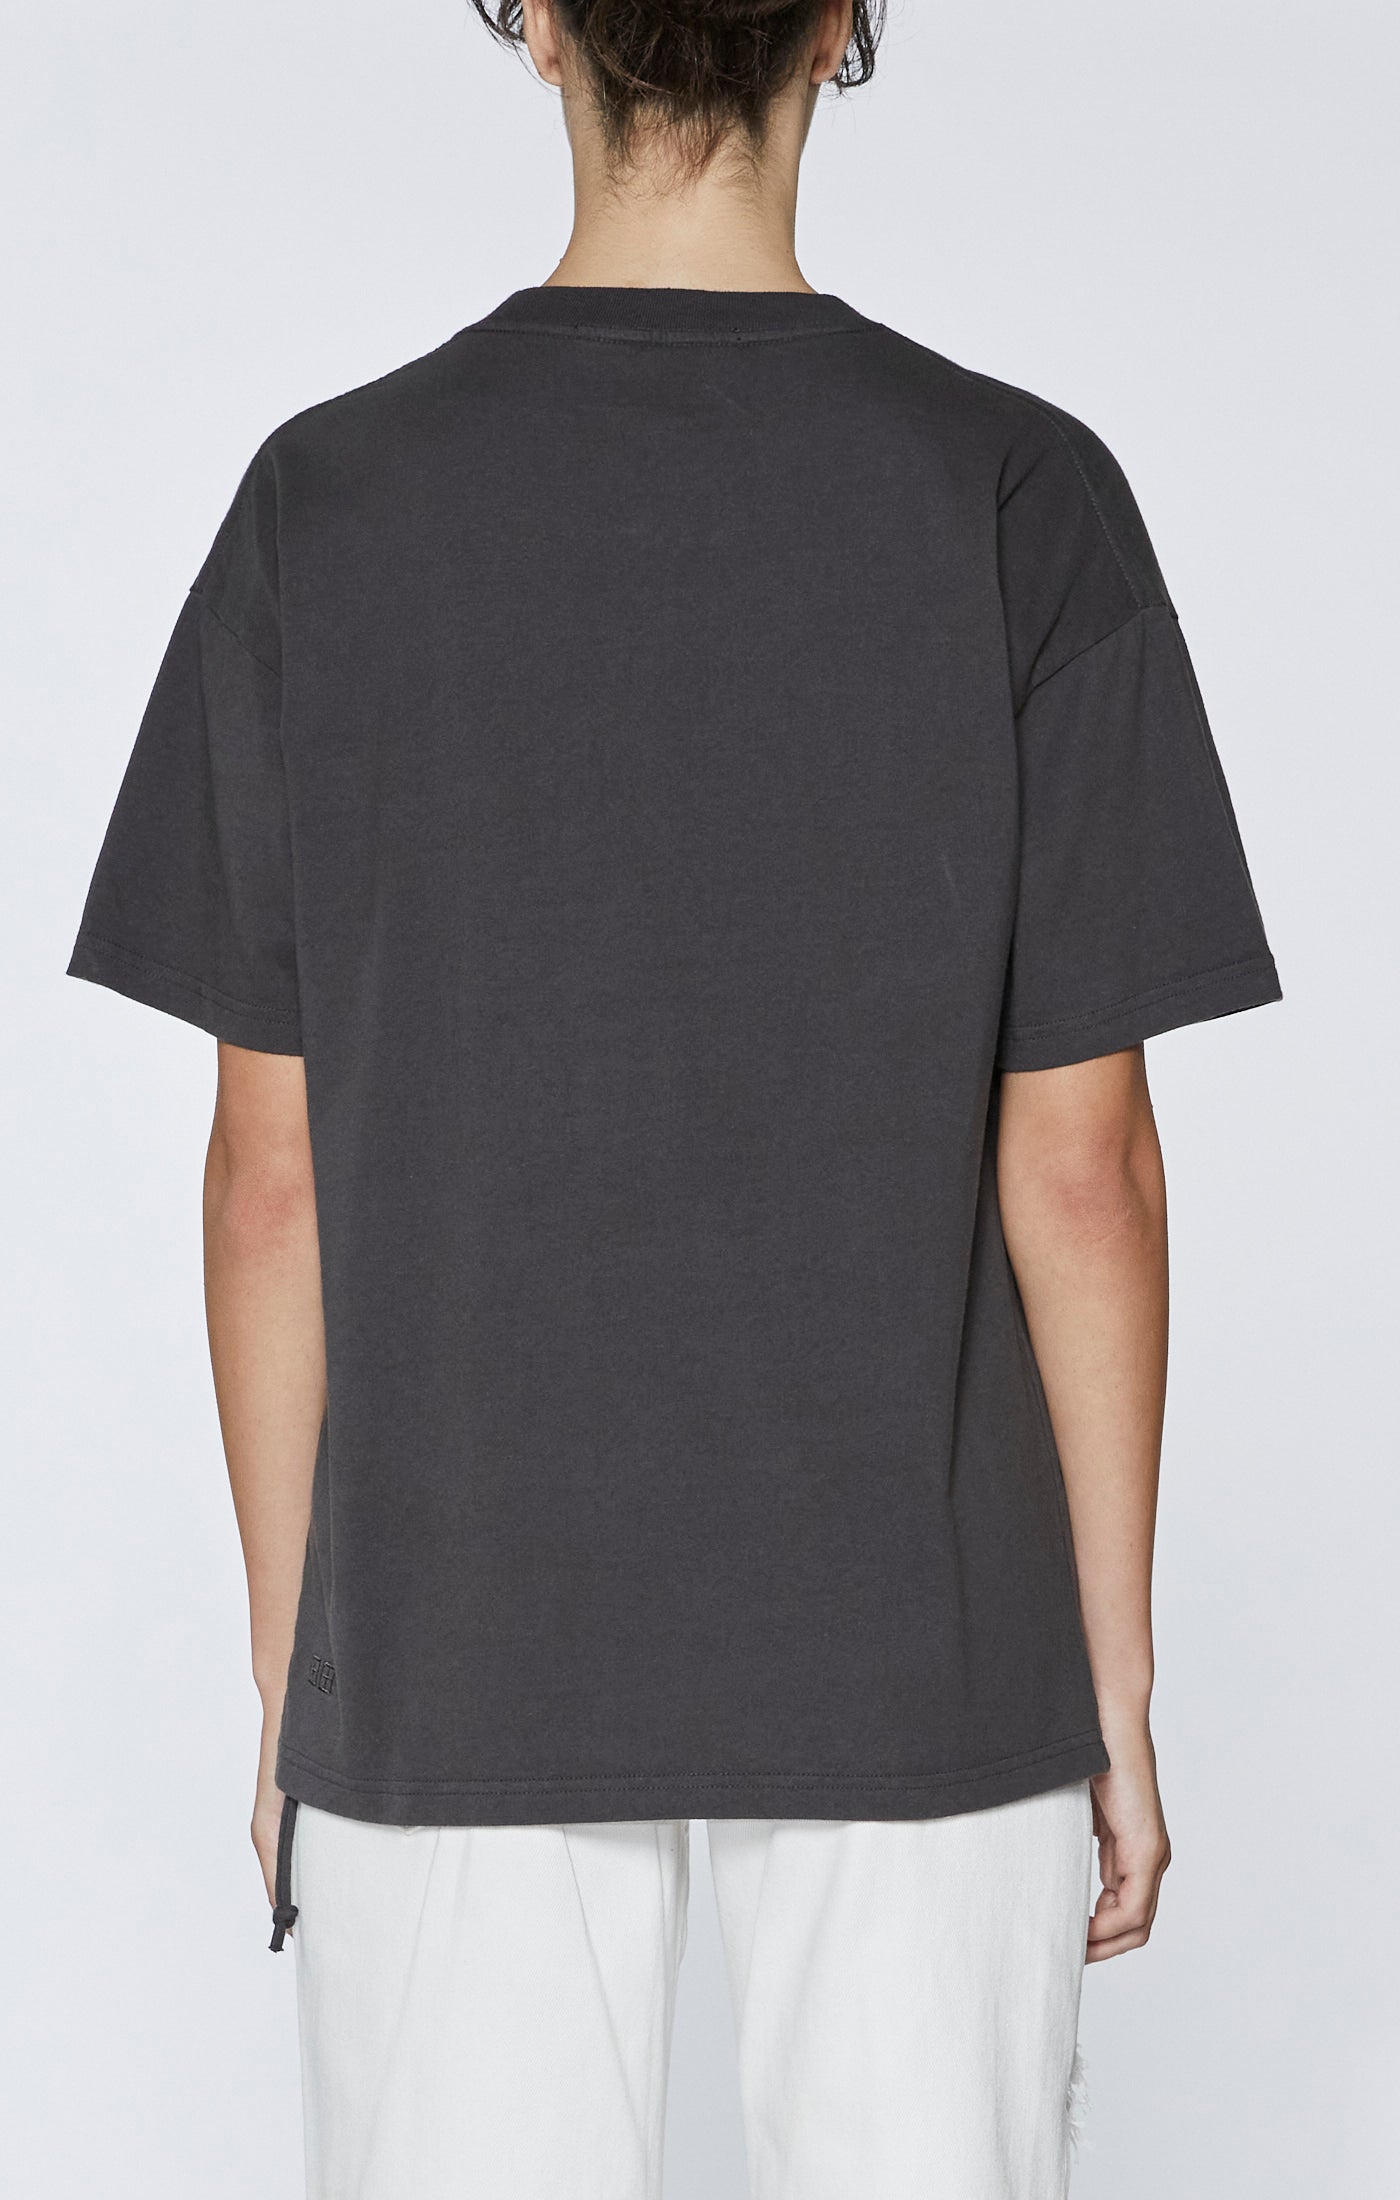 Sprayed Oh G SS Tee - Charcoal